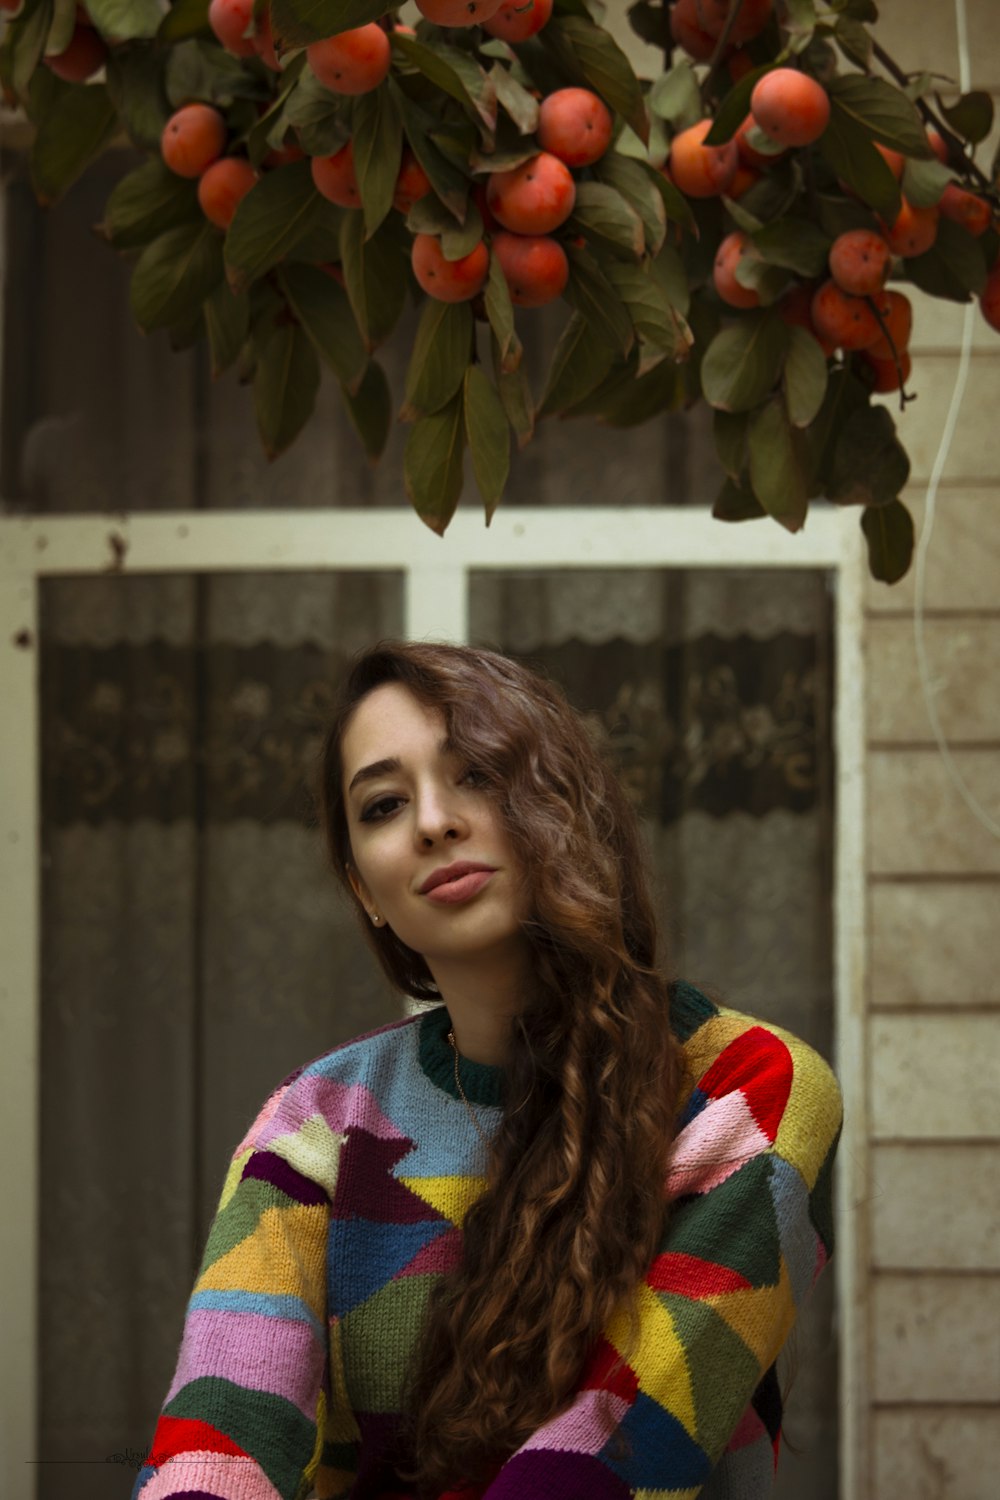 woman in green yellow and blue sweater standing near red leaves